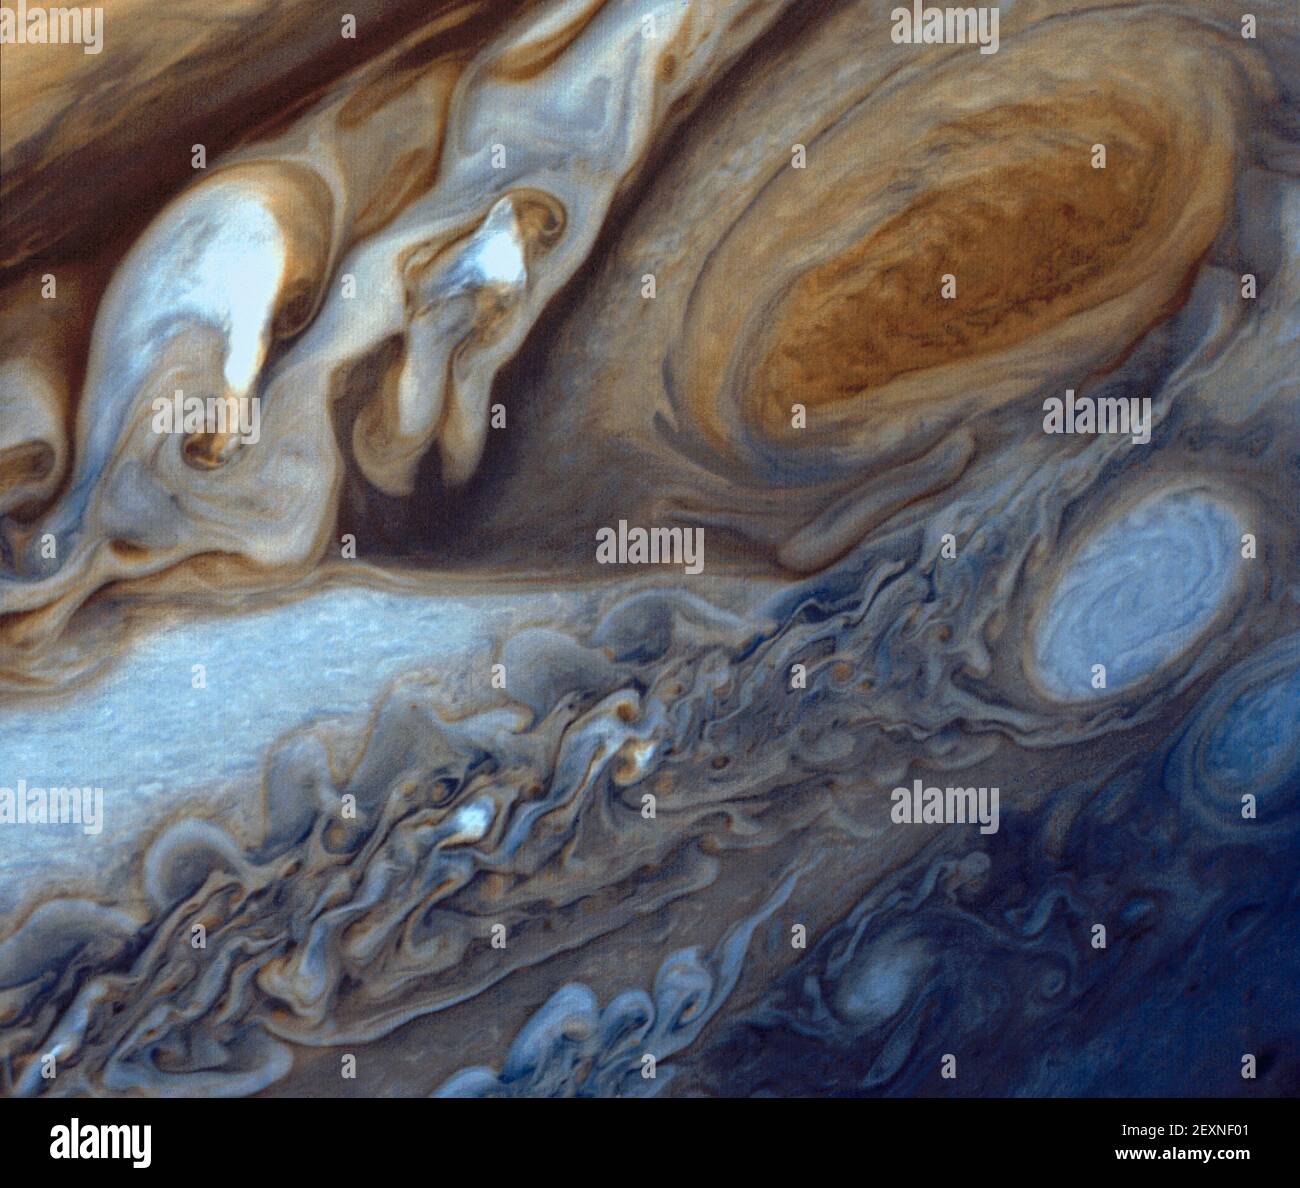 At about 89,000 miles in diameter, Jupiter could swallow 1,000 Earths. It is the largest planet in the solar system and perhaps the most majestic. Vibrant bands of clouds carried by winds that can exceed 400 mph continuously circle the planet's atmosphere. Such winds sustain spinning anticyclones like the Great Red Spot -- a raging storm three and a half times the size of Earth located in Jupiterâ€™s southern hemisphere. In January and February 1979, NASA's Voyager 1 spacecraft zoomed toward Jupiter, capturing hundreds of images during its approach, including this close-up of swirling clouds a Stock Photo